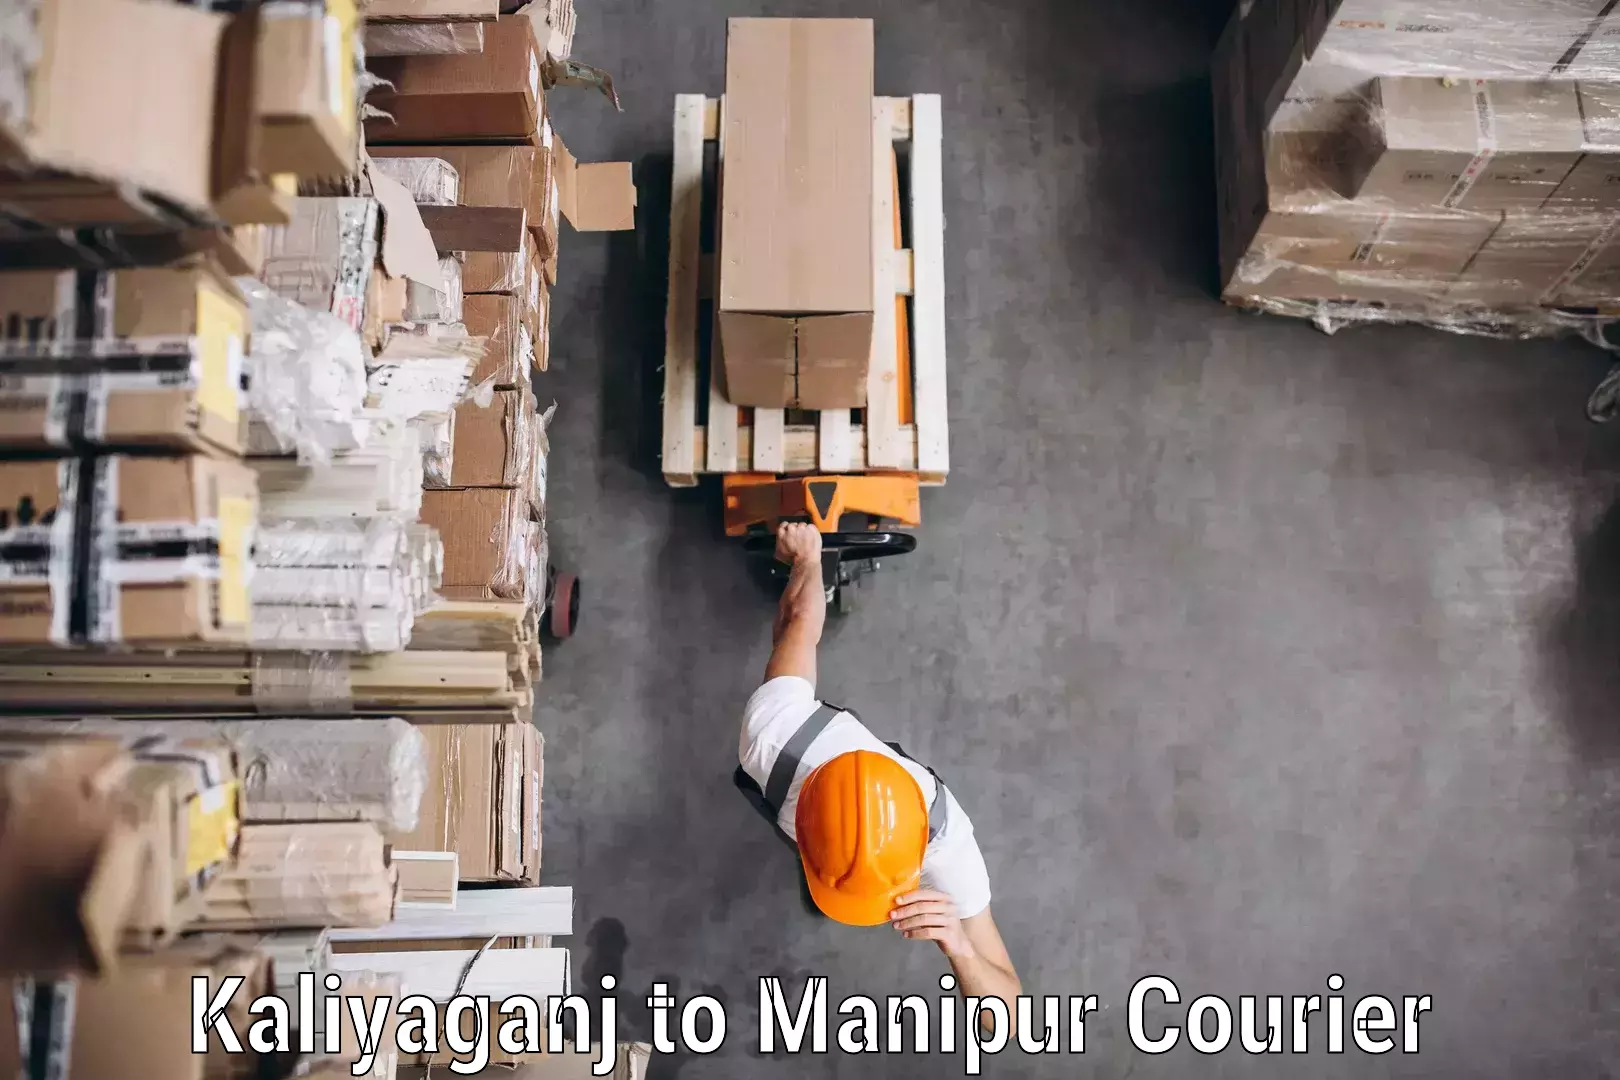 State-of-the-art courier technology Kaliyaganj to Chandel